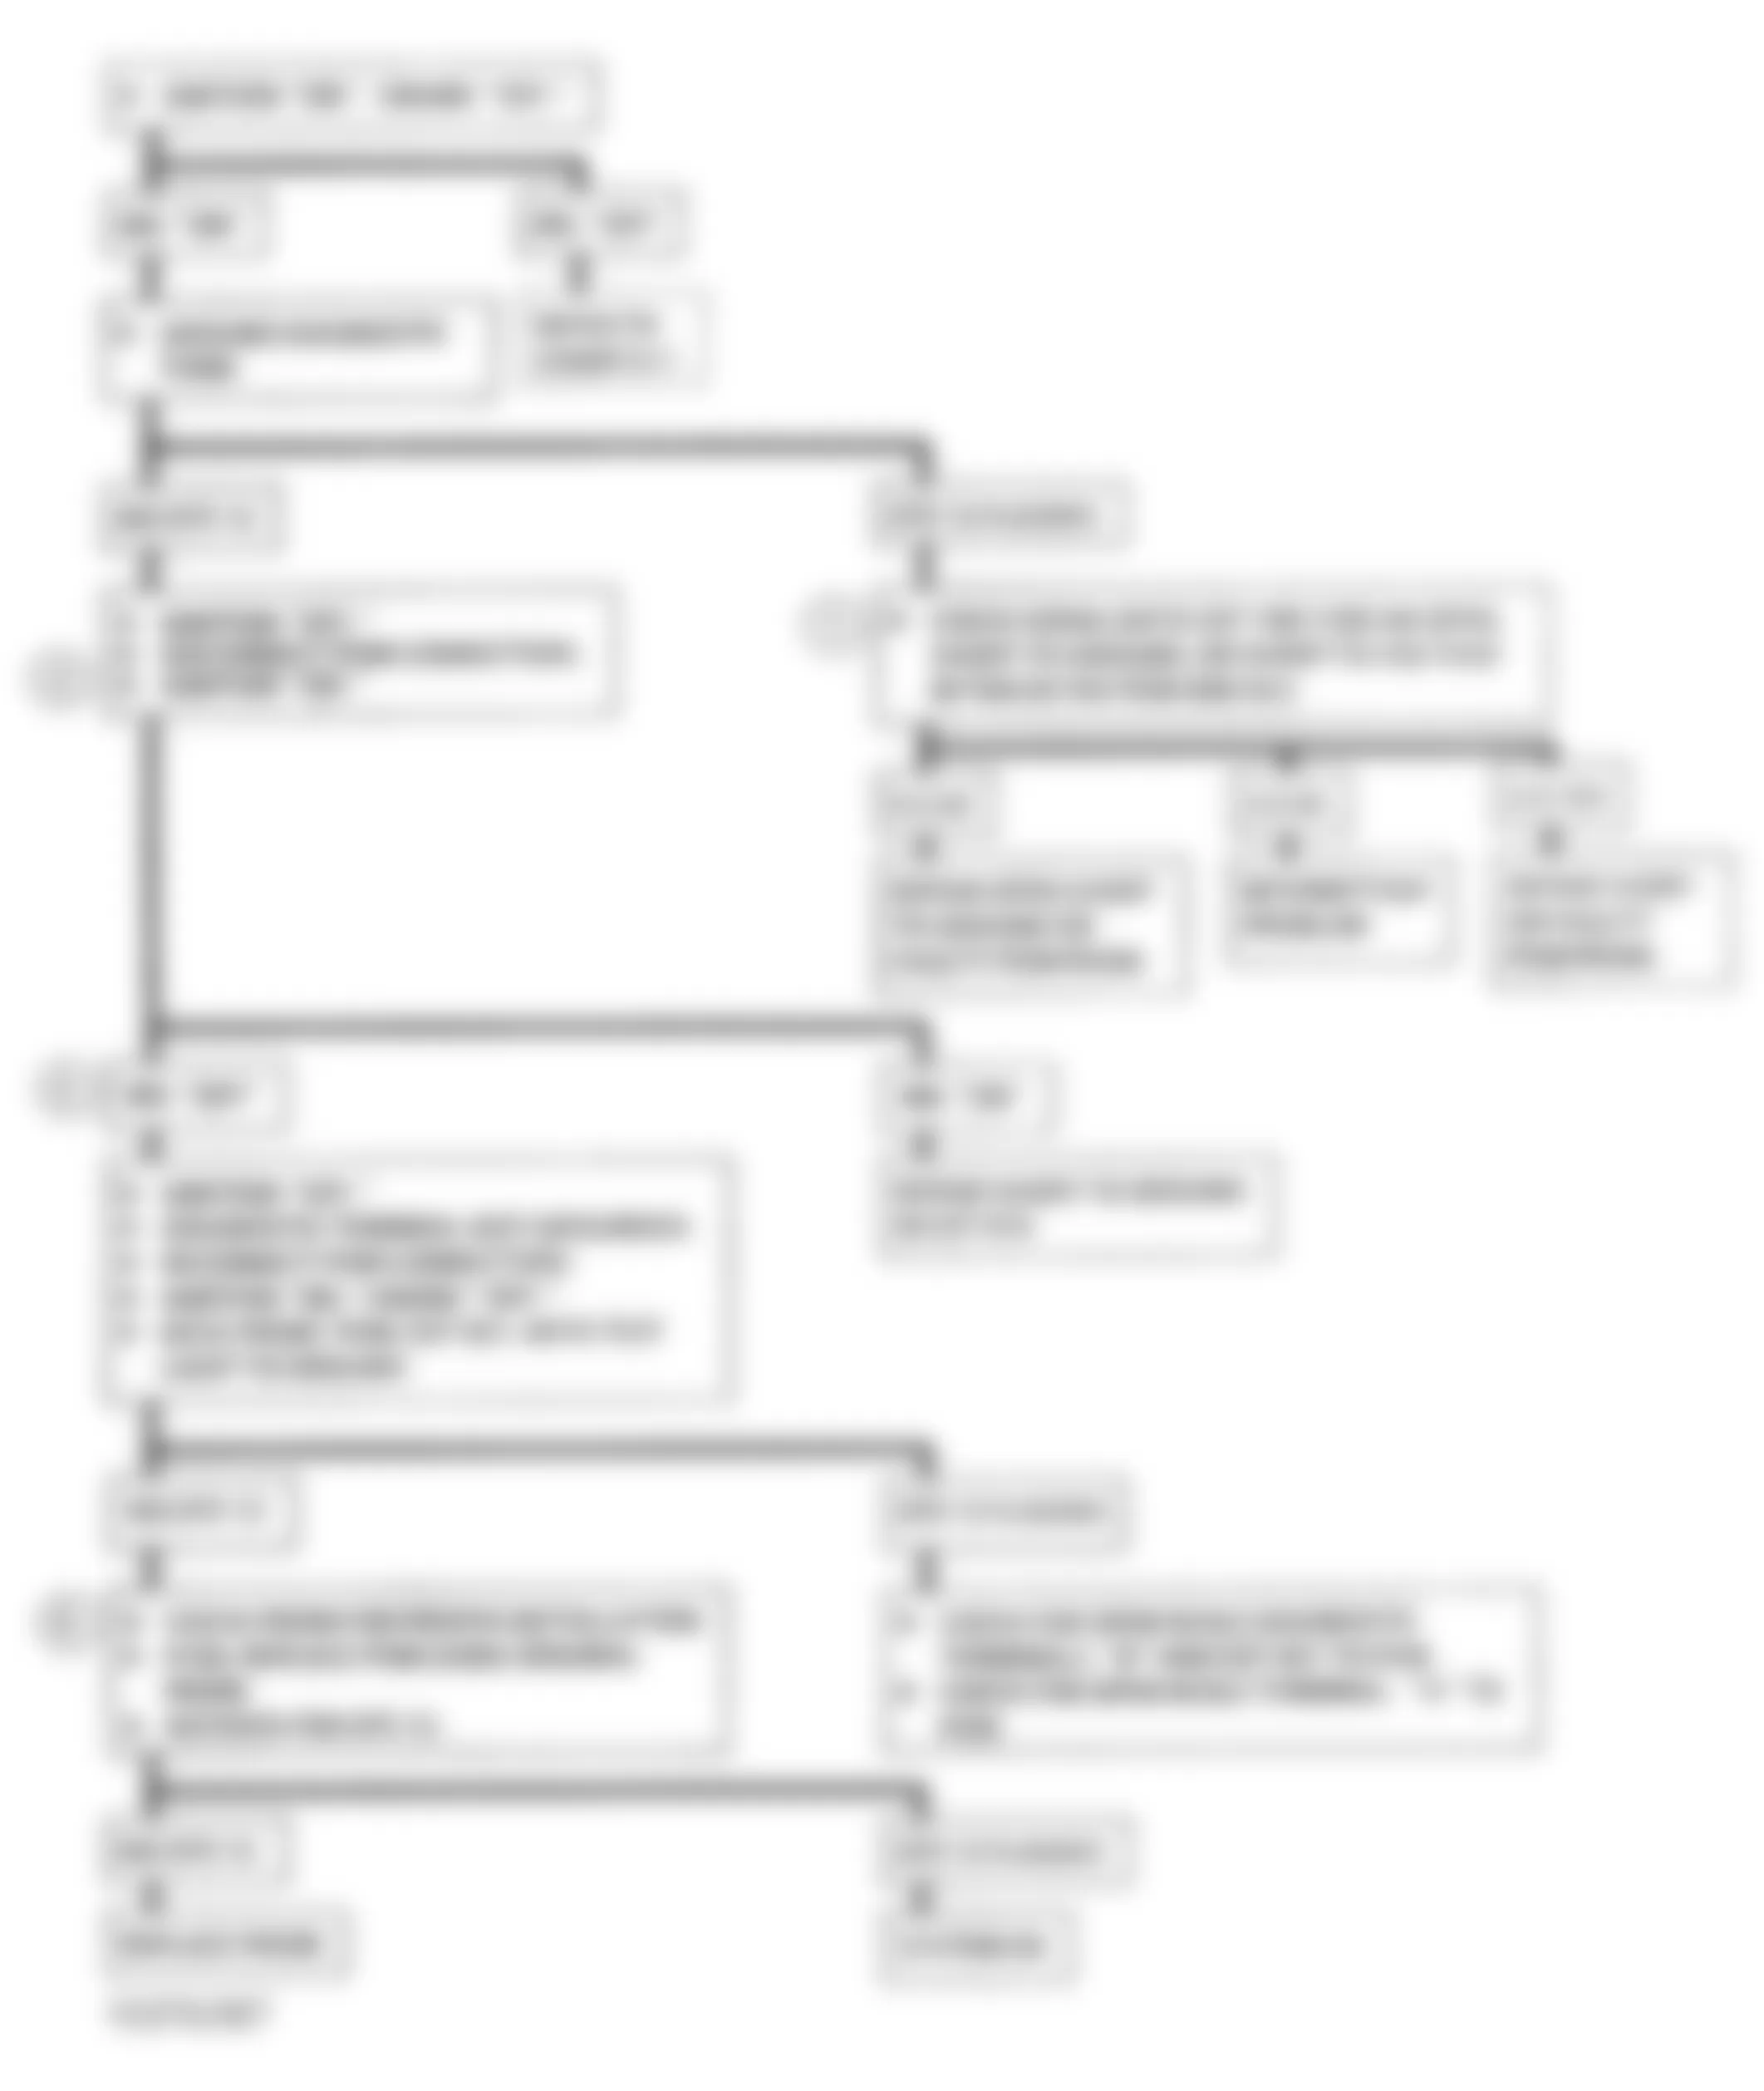 Chevrolet Pickup K3500 1993 - Component Locations -  A-2, Flowchart, No DLC Data, MIL On All Time - A/T